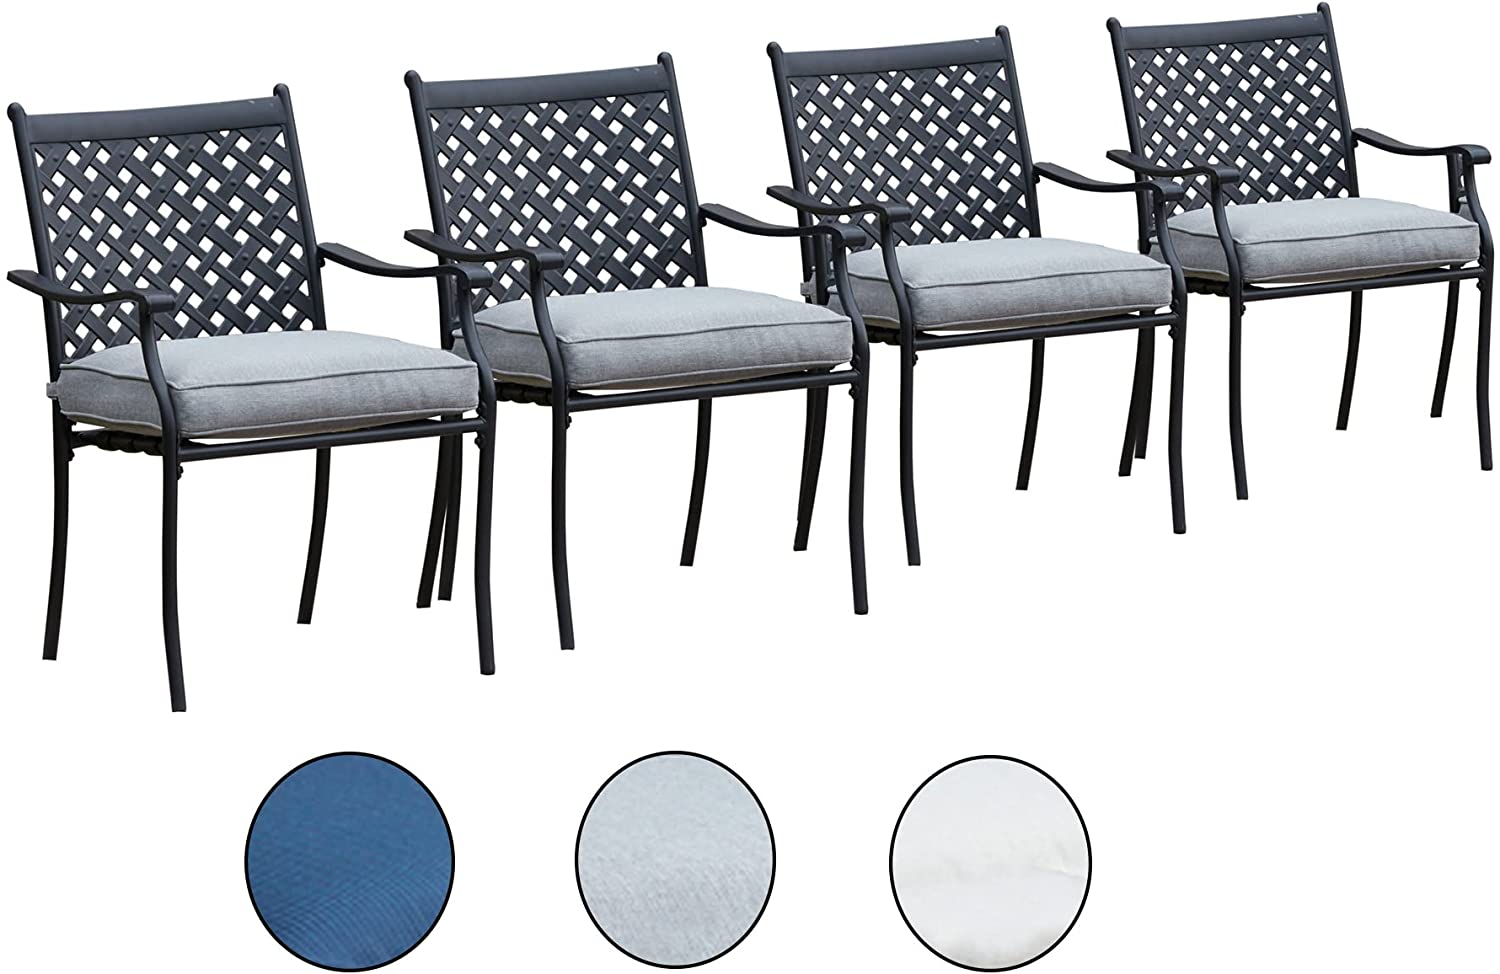 LOKATSE HOME Wrought Iron Cushioned Patio Dining Chairs, 4-Piece